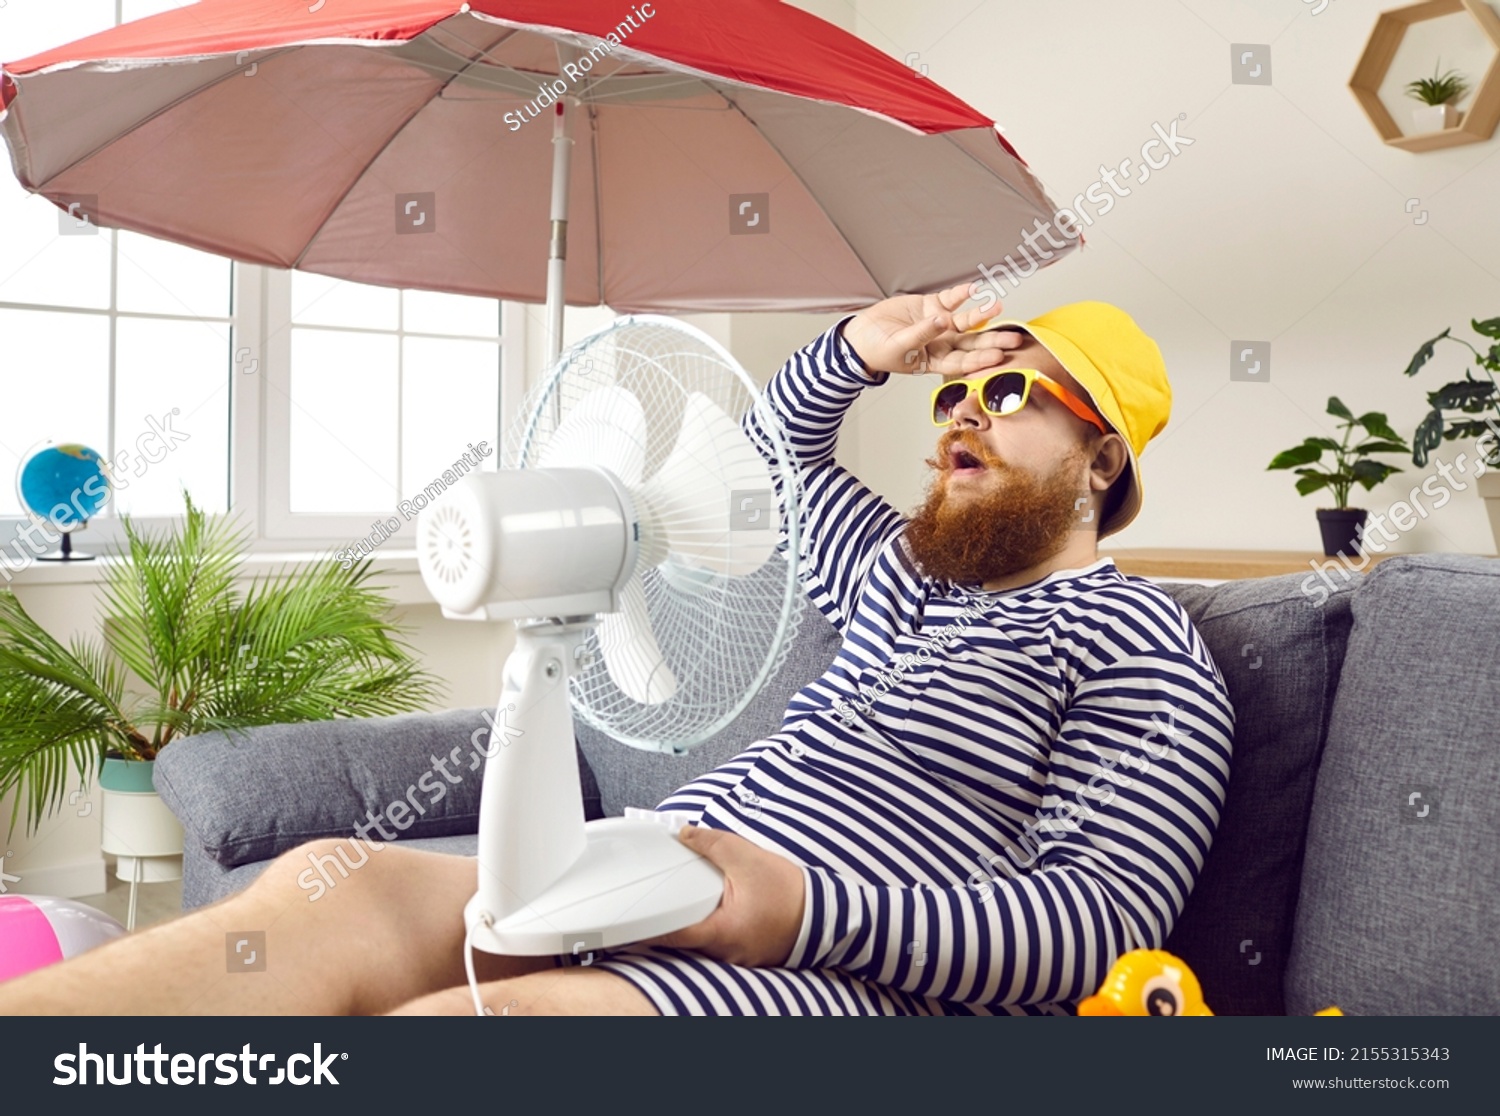 Funny sweaty chubby bearded man in swimsuit sitting at home, suffering from crazy summer heat, wiping sweat off forehead, holding electric fan, wishing for heatwave to stop and fresh breeze to blow #2155315343